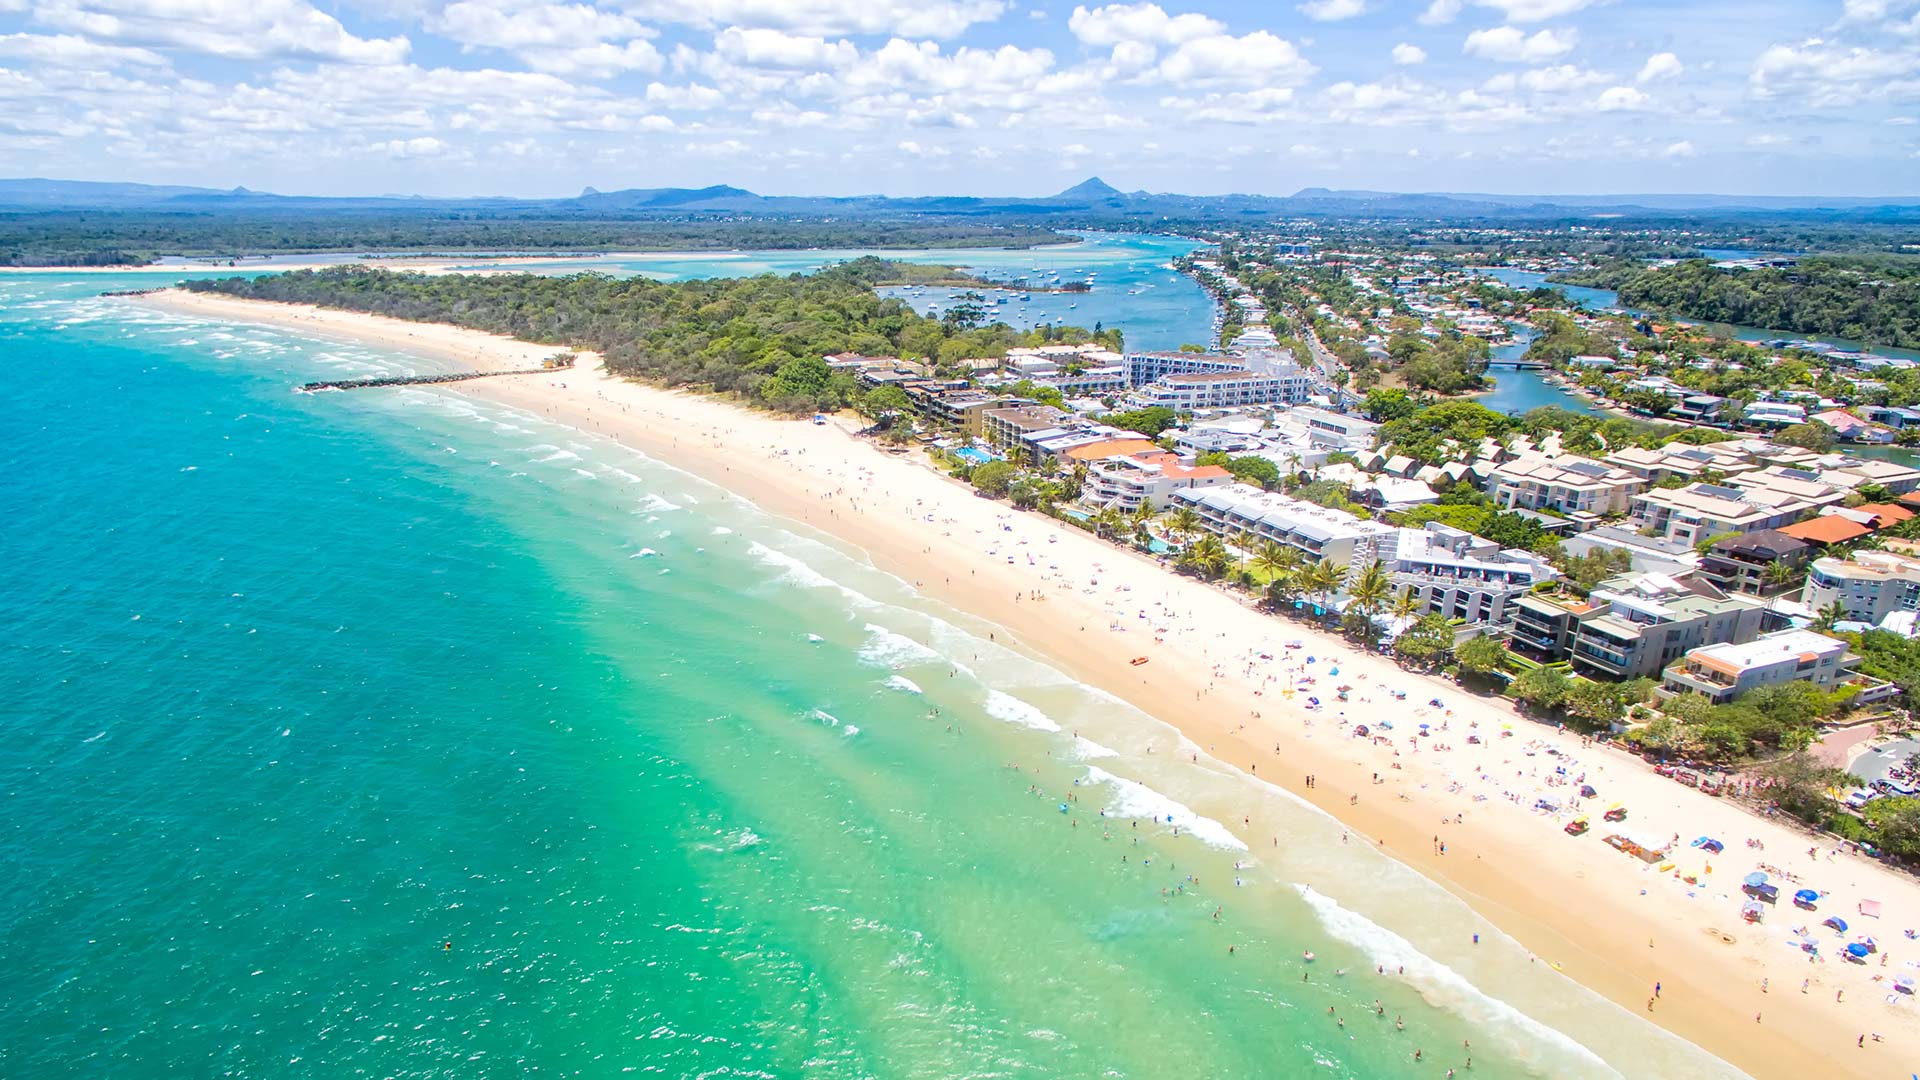 Panorama to illustrate dating in noosa